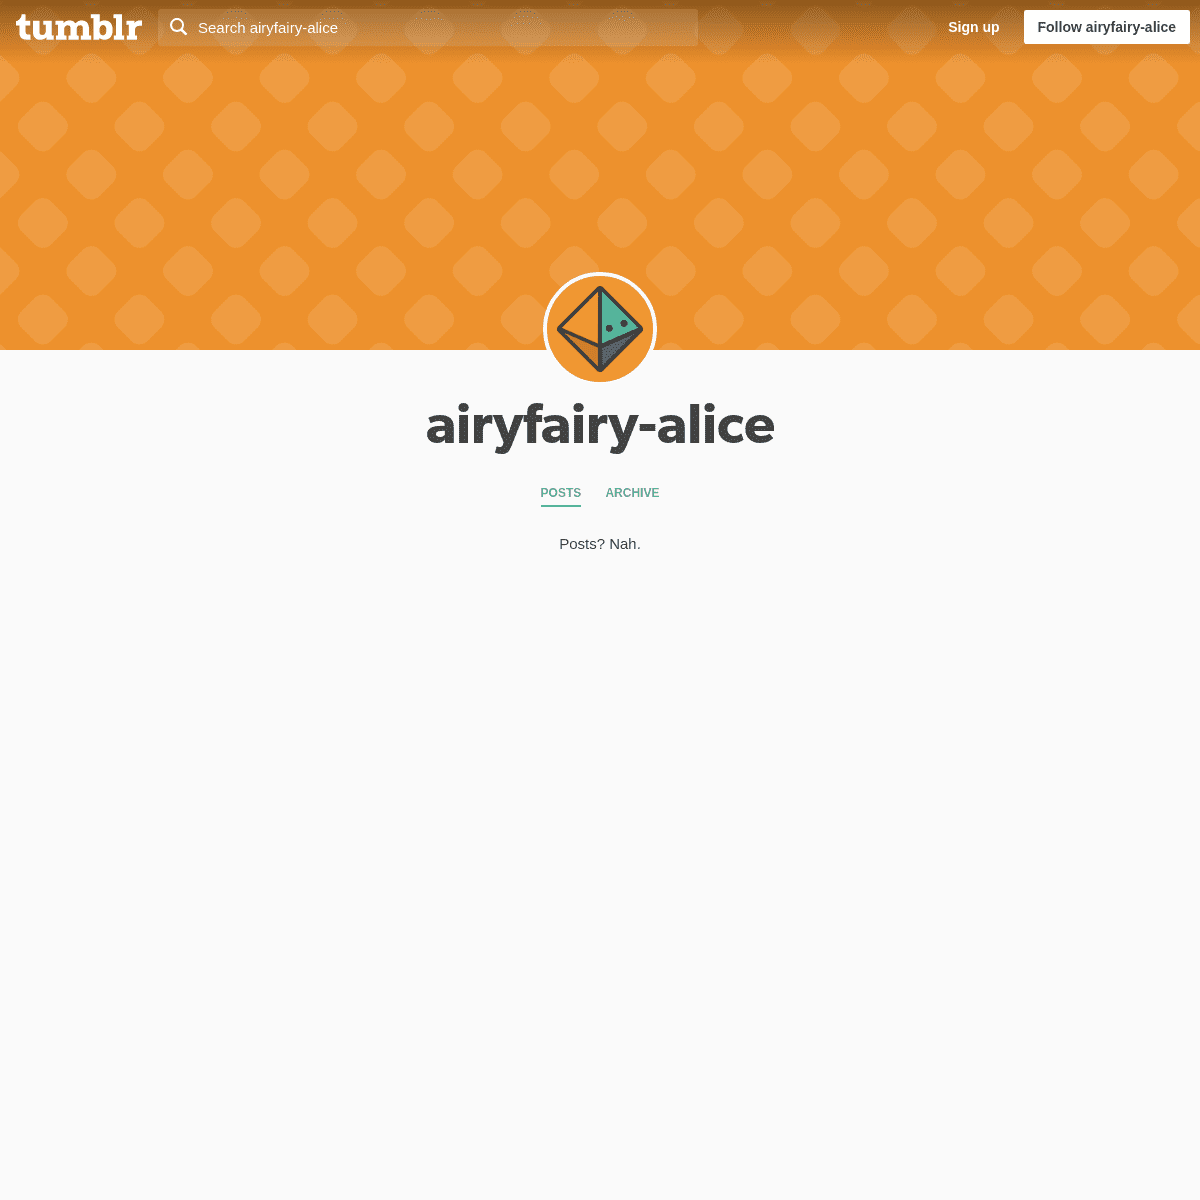 A complete backup of airyfairy-alice.tumblr.com